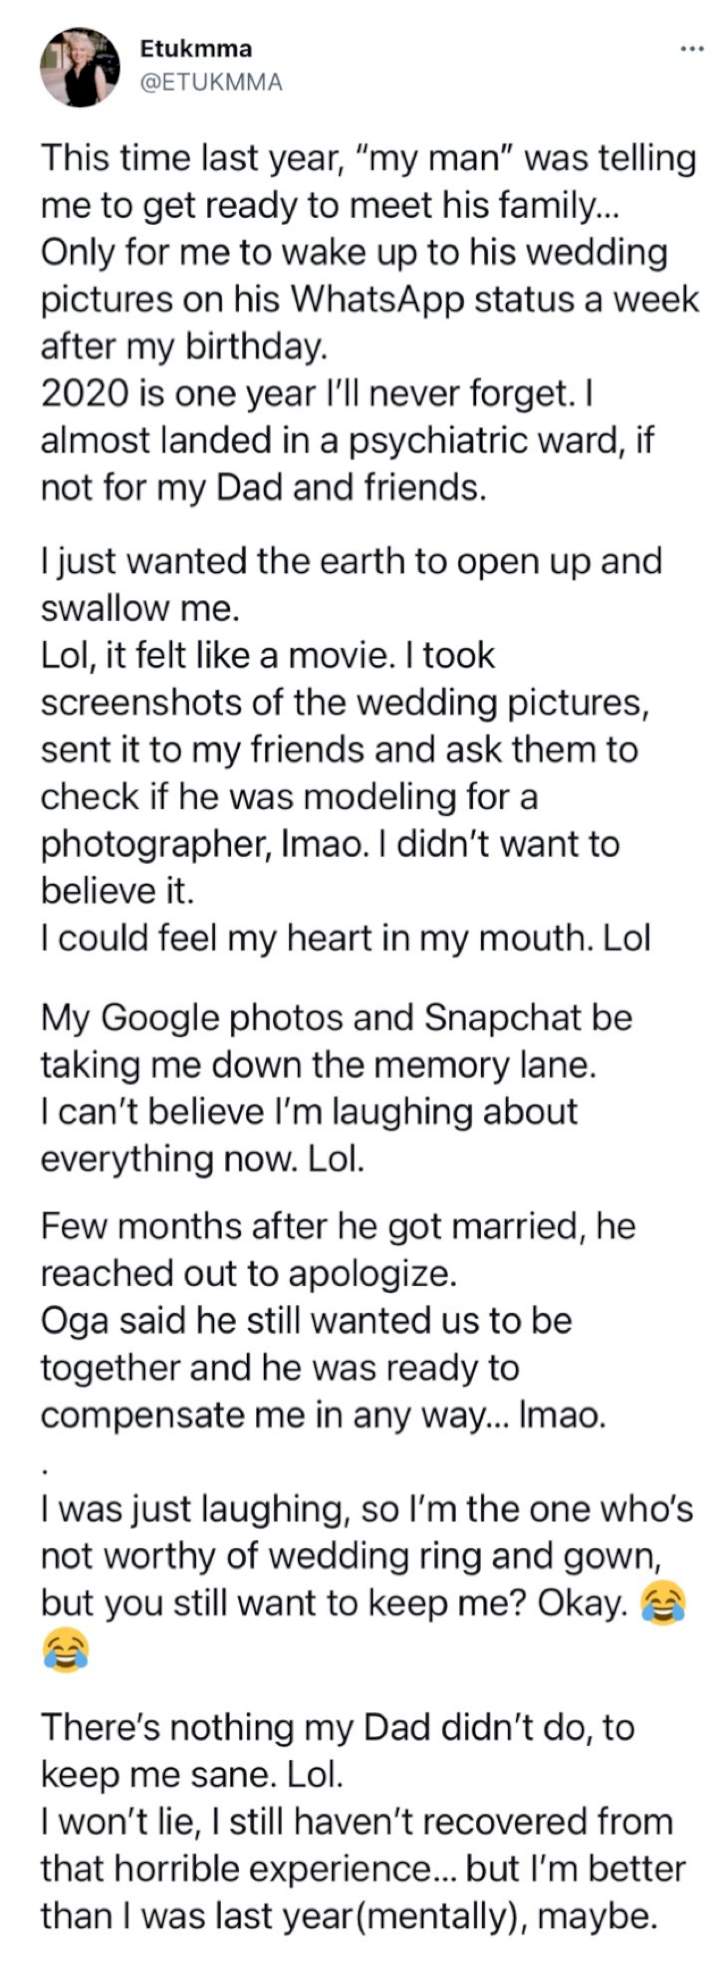 Lady narrates how she stumbled upon her man's wedding photos days after being told to get ready to meet his family